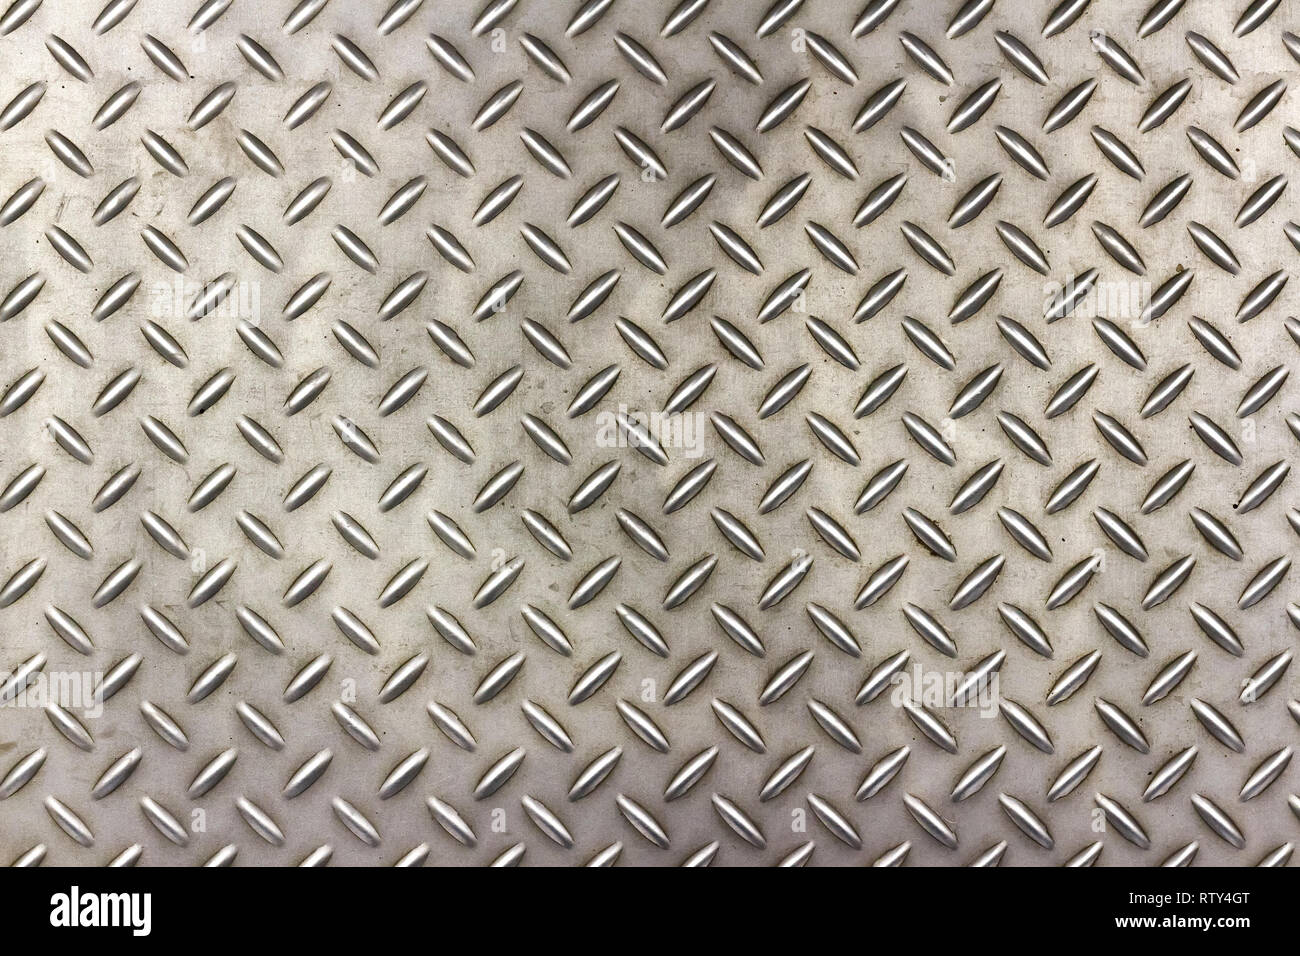 Metal texture background or stainless plate pattern Stock Photo